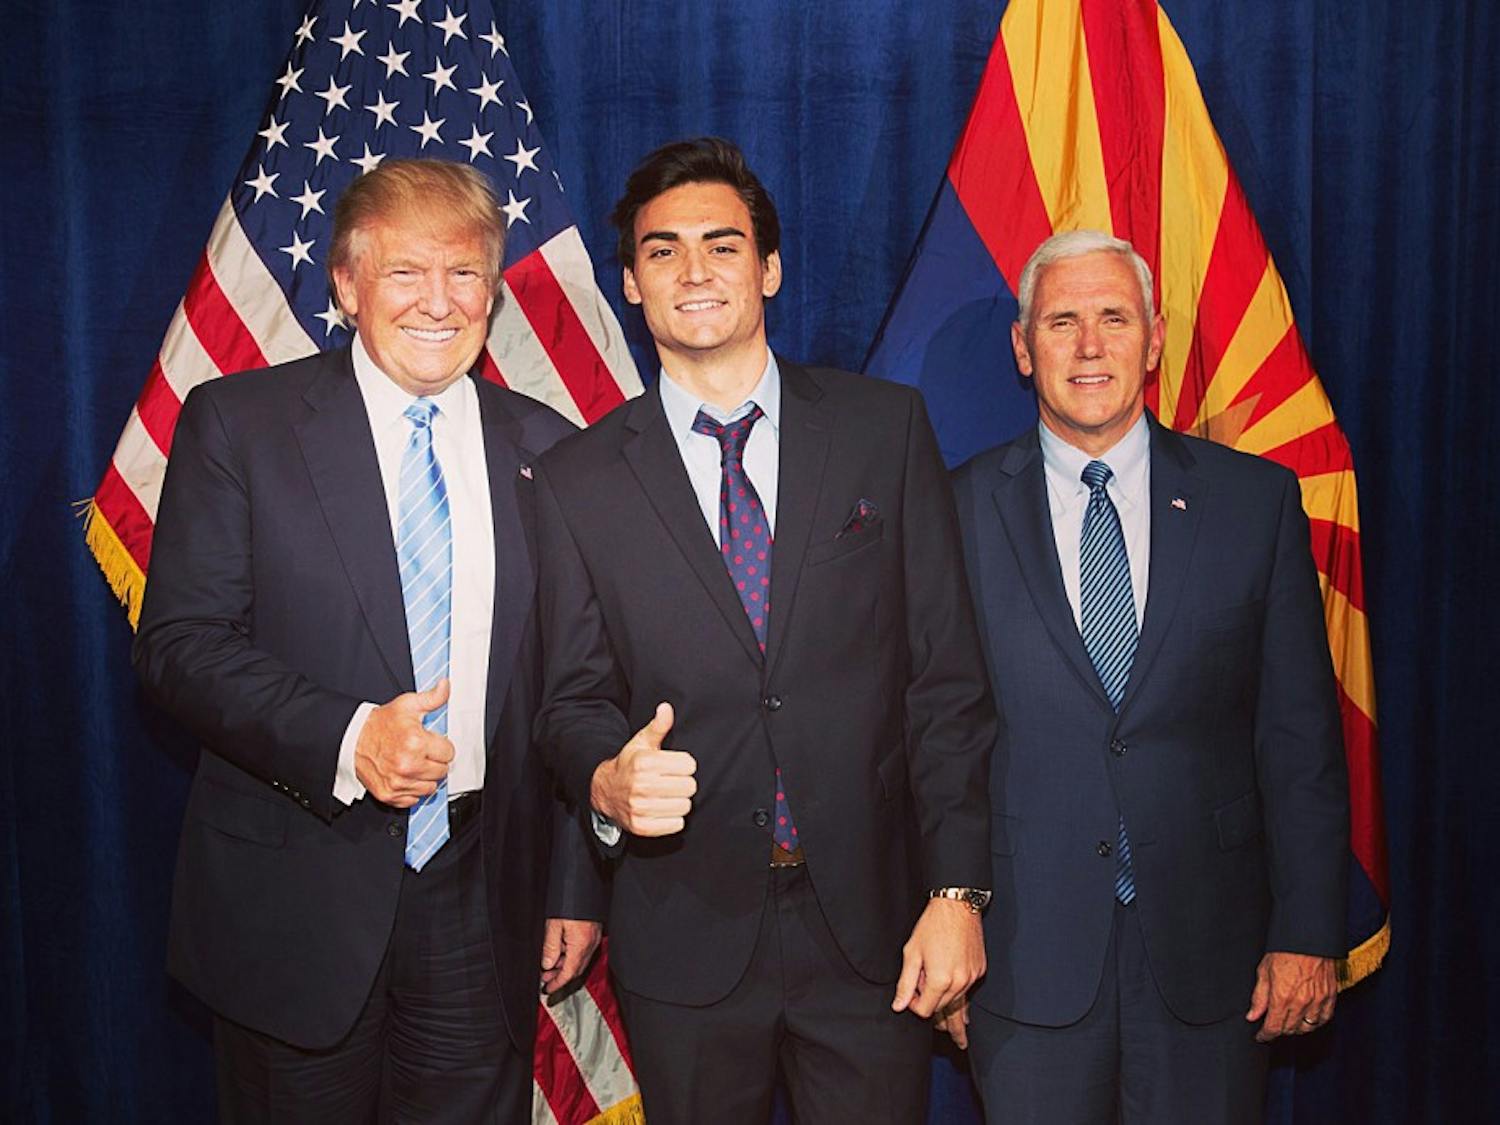 ASU student Danny Cox, who temporarily&nbsp;withdrew from the University to assist in Donald Trump's campaign for president, poses for a photo with Trump and his running&nbsp;mate Gov.&nbsp;Mike Pence.&nbsp;